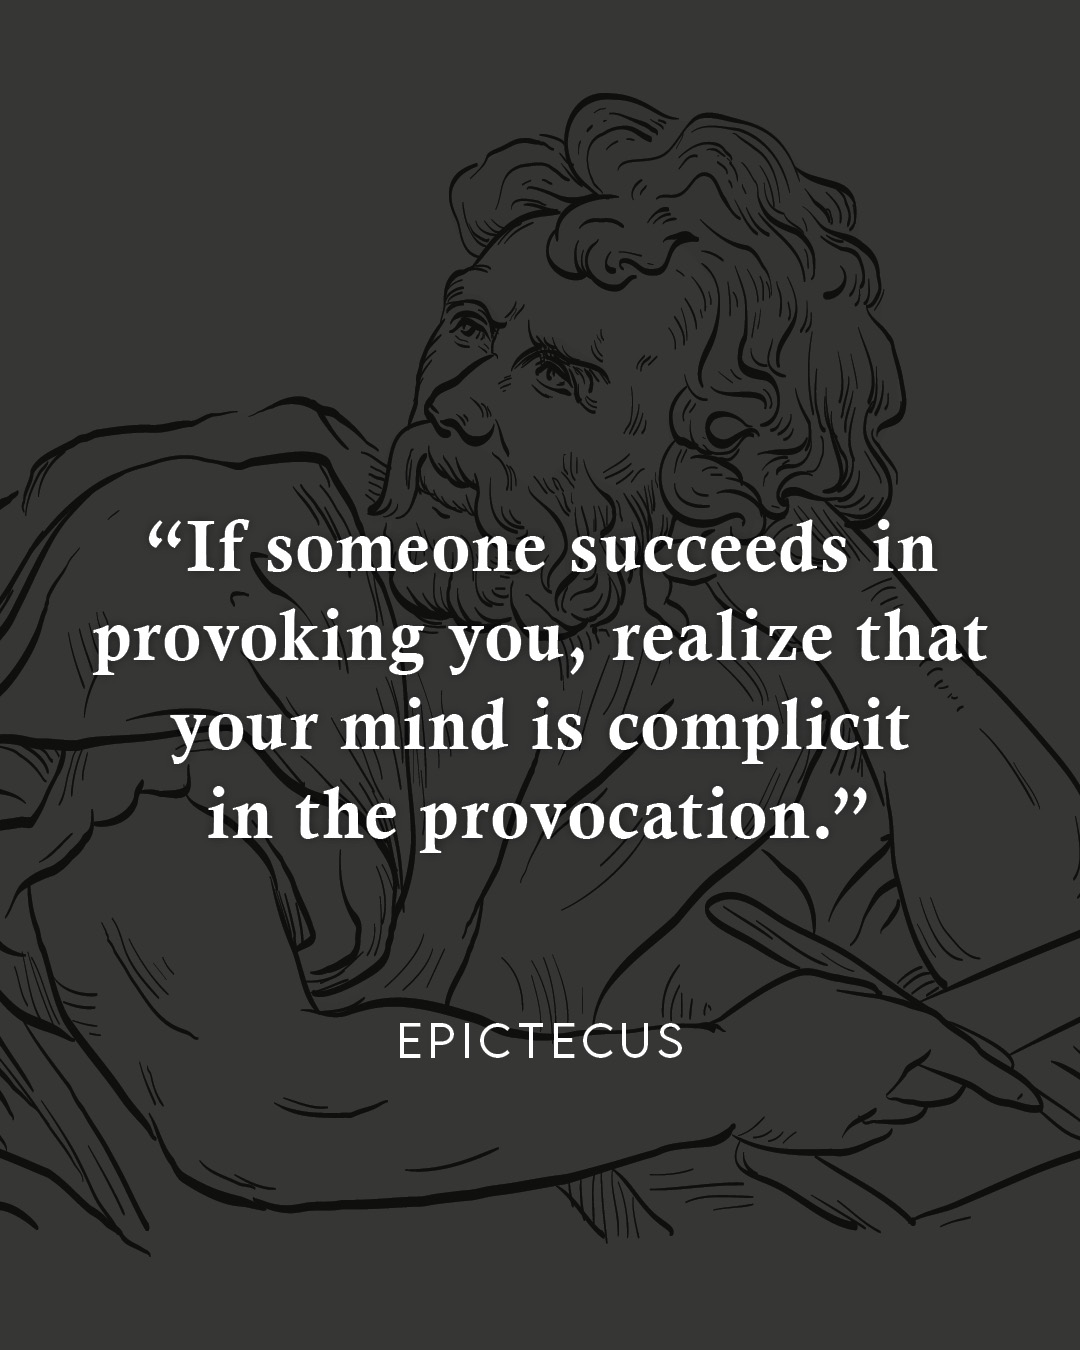 If someone succeeds in provoking you, realize that your mind is complicit in the provocation. – Epictetus